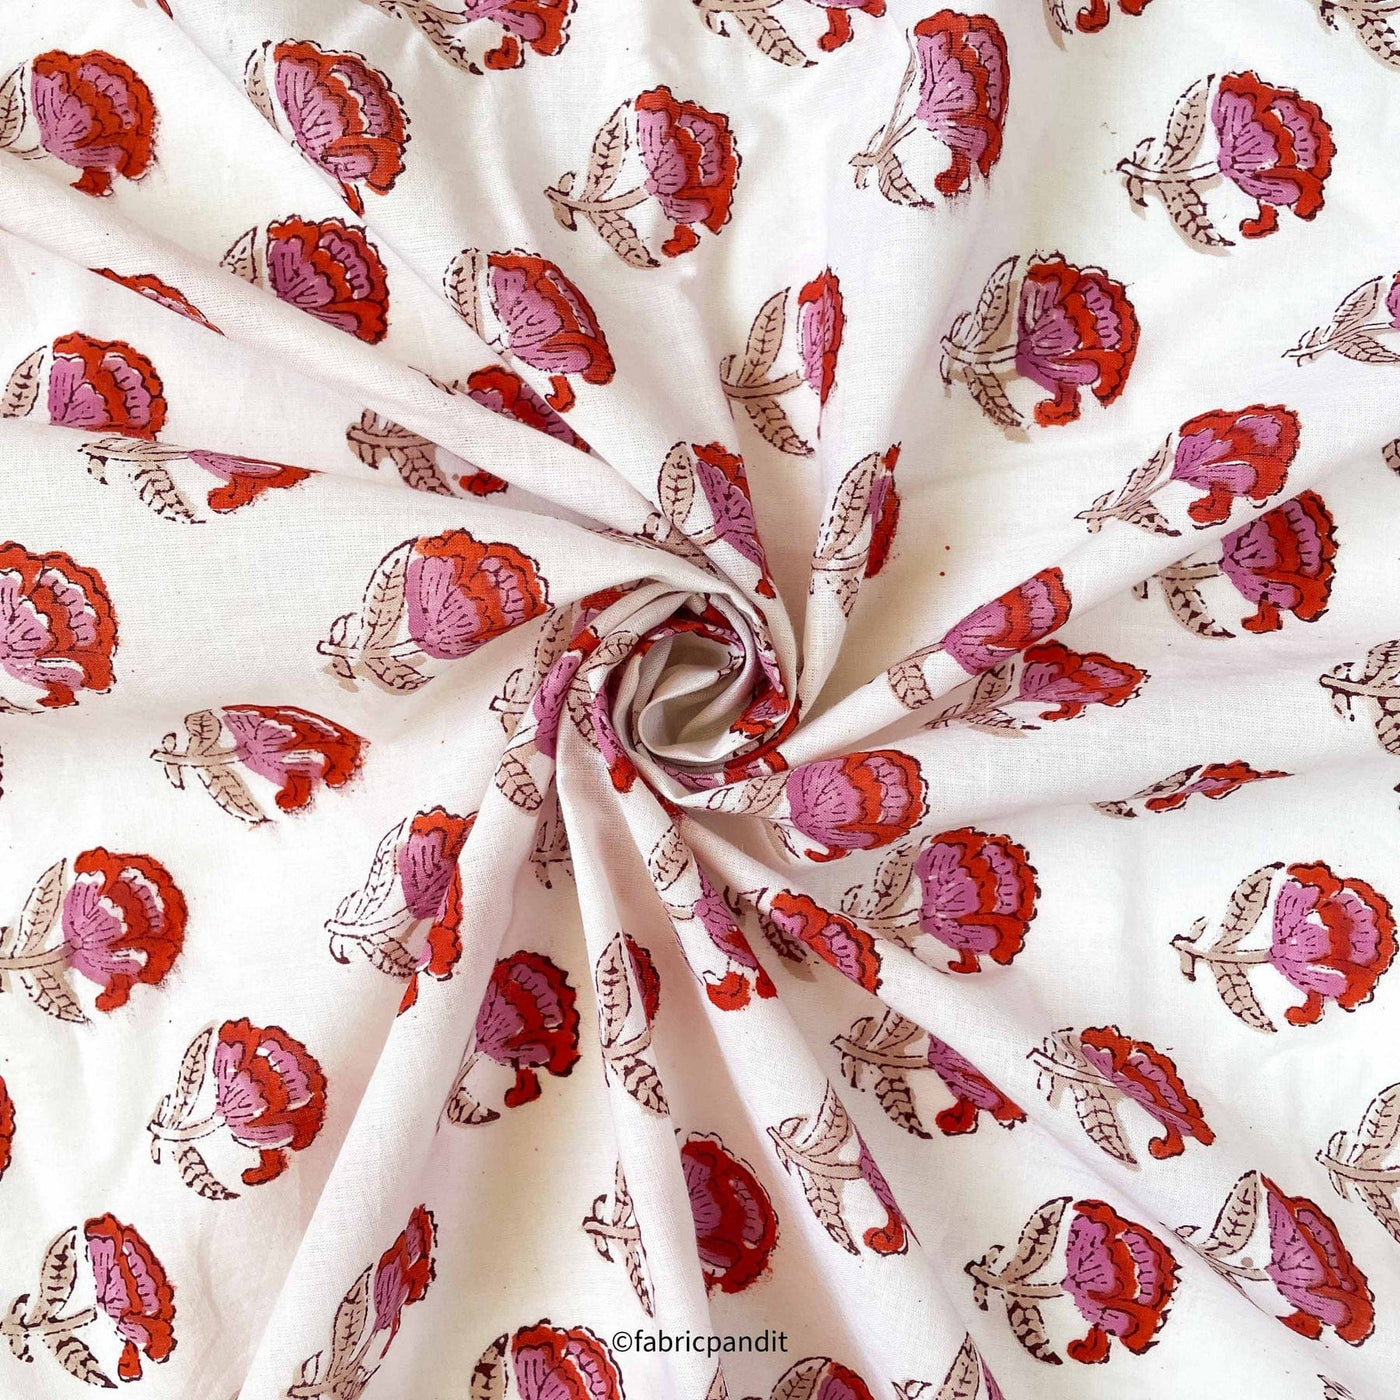 Hand Block Printed Cotton Fabric Cut Piece (CUT PIECE) Rose Pink & Red Mini Peonies All Over Hand Block Printed Pure Cotton Fabric (Width 42 inches)